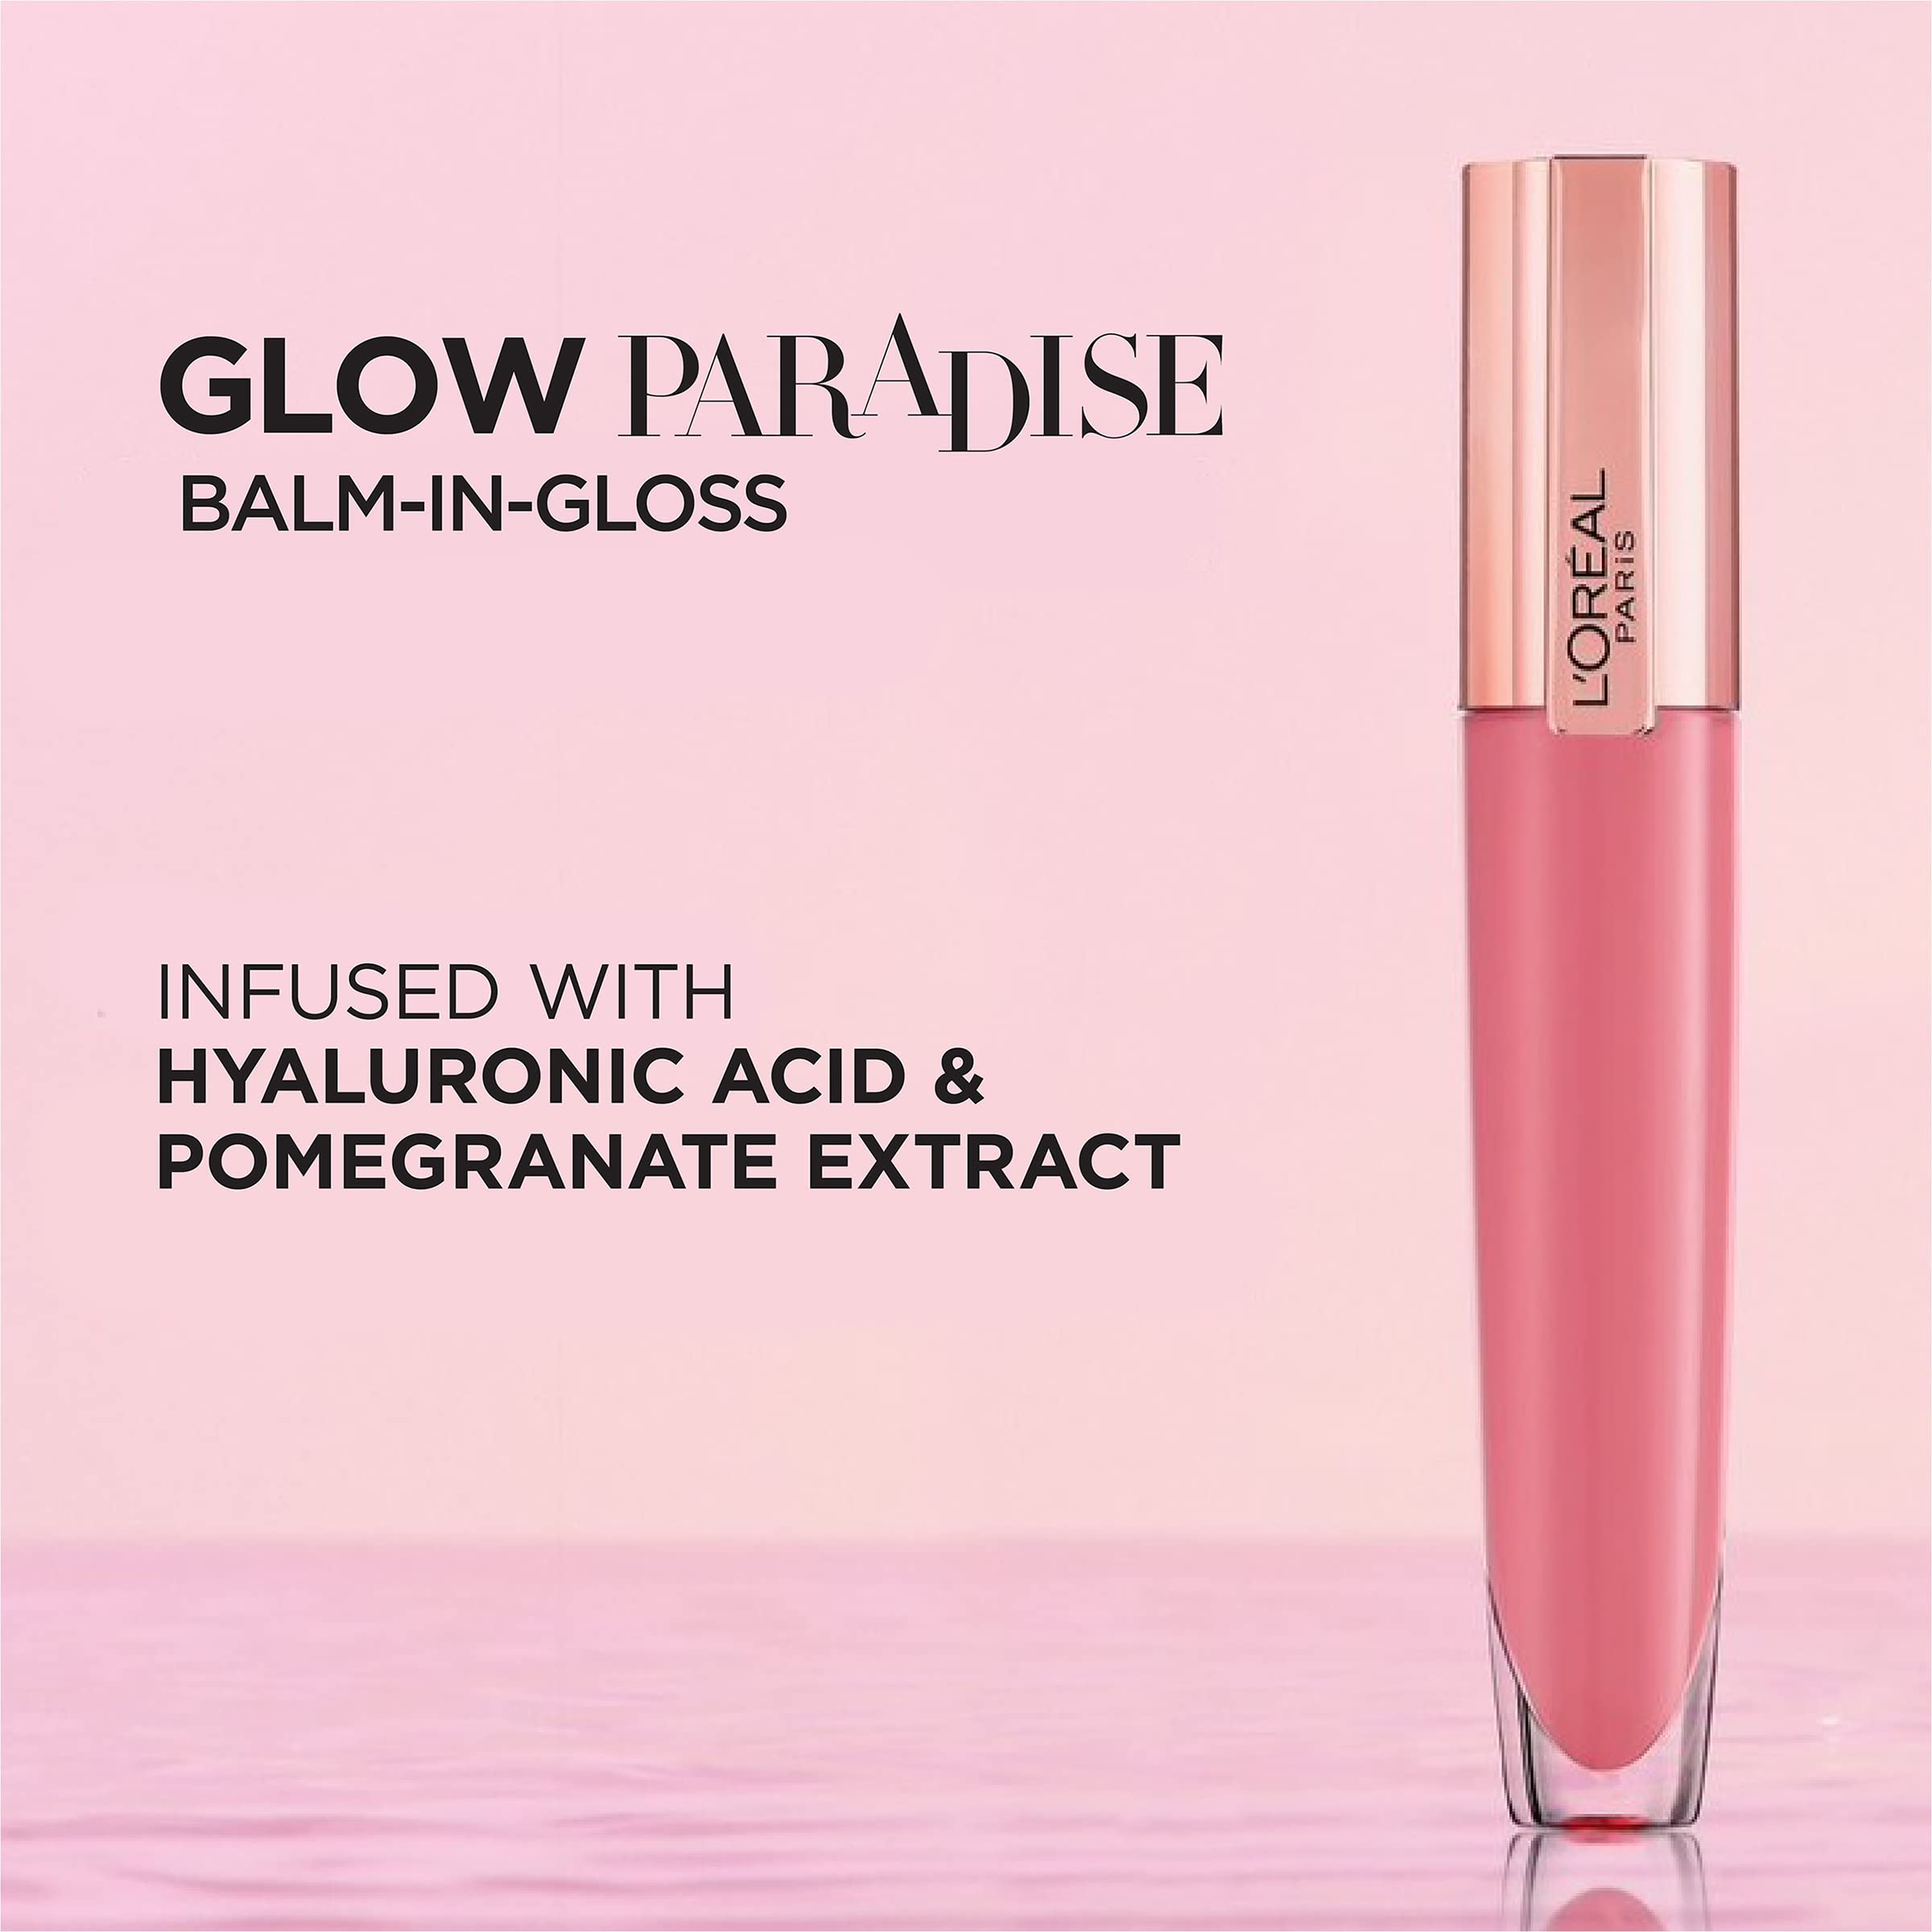 L'Oreal Paris Glow Paradise Balm-in-Gloss, Lip Balm, Non-Sticky Liquid Lip Balm with Pomegranate Extract & Hyaluronic Acid for Sensitive Lips, Dermatologist Tested, Angelic Daydream, 0.23 fl. oz.